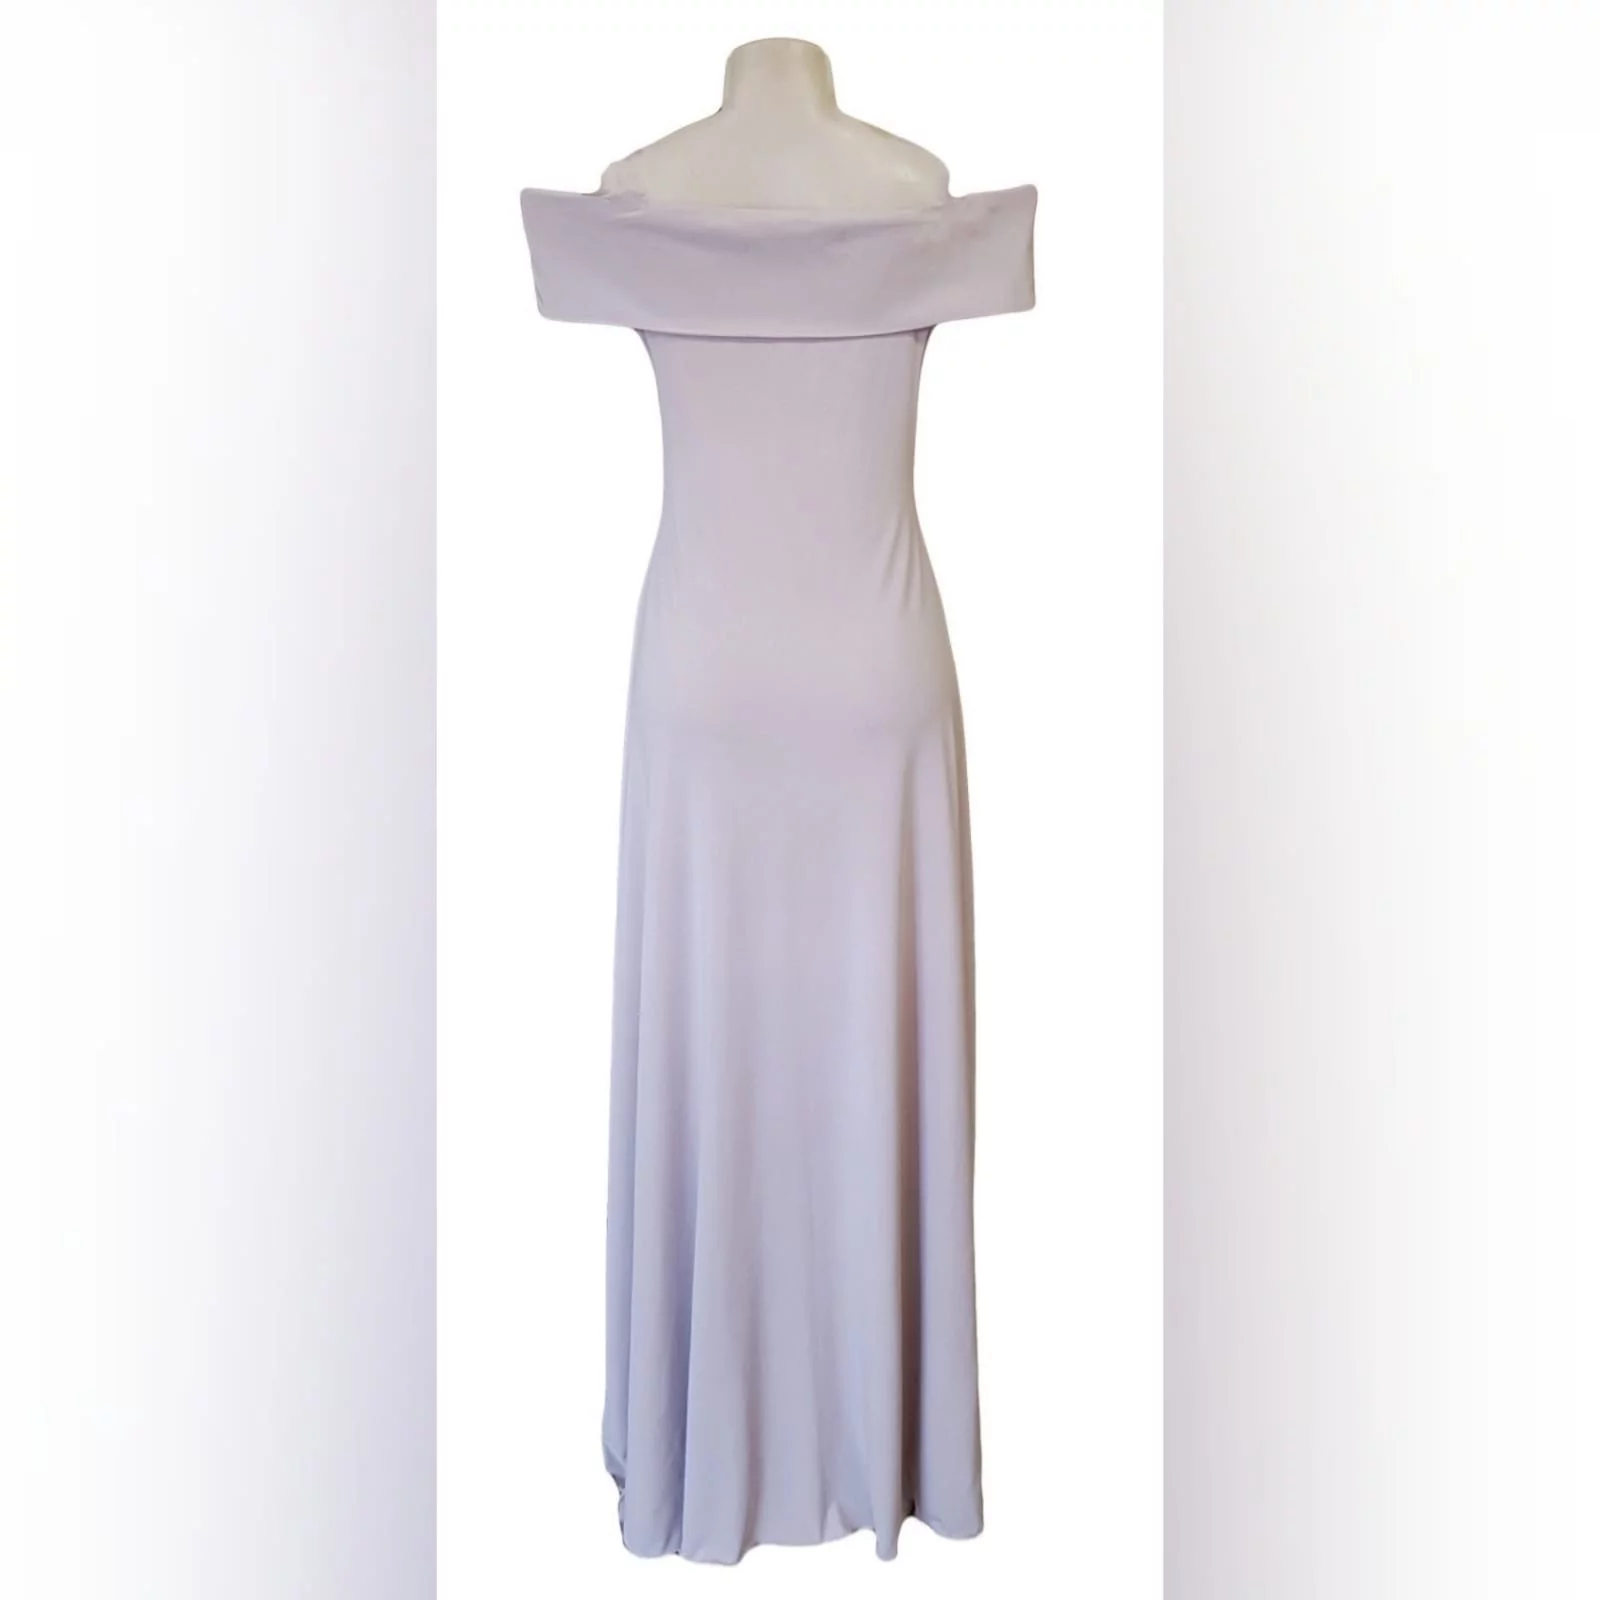 Simple elegant nude long prom dress 6 <blockquote>"always be a first rate version of yourself and not a second rate version of someone else" judy garland</blockquote> simple elegant nude long prom dress with an off shoulder cross bust neckline and a slit. A gorgeous design that can be worn to several occasions due to its simplicity.